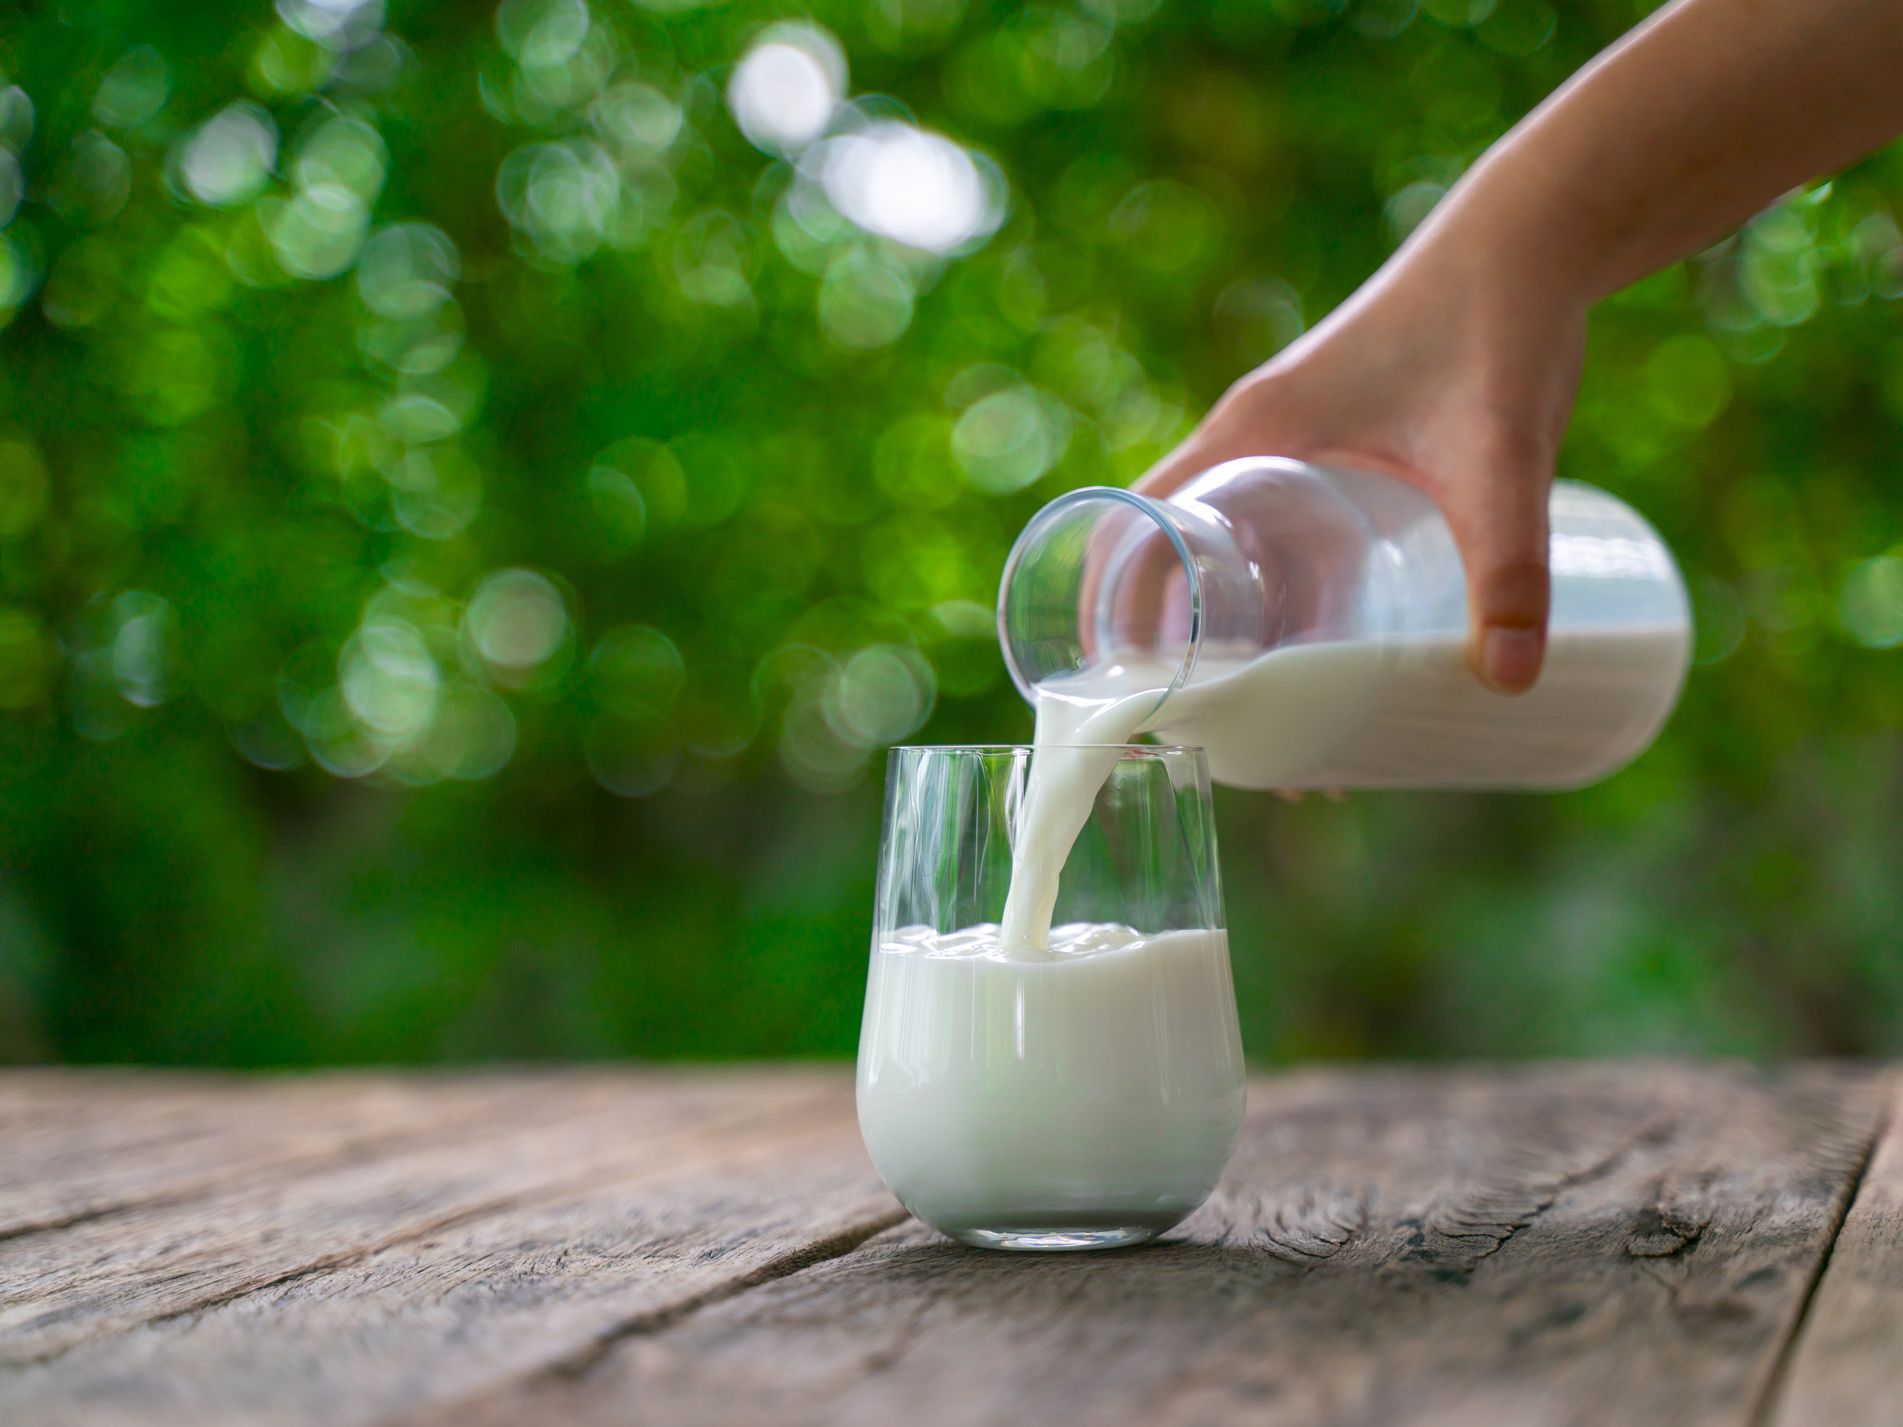 Milk - Most Consumed Beverages in the World